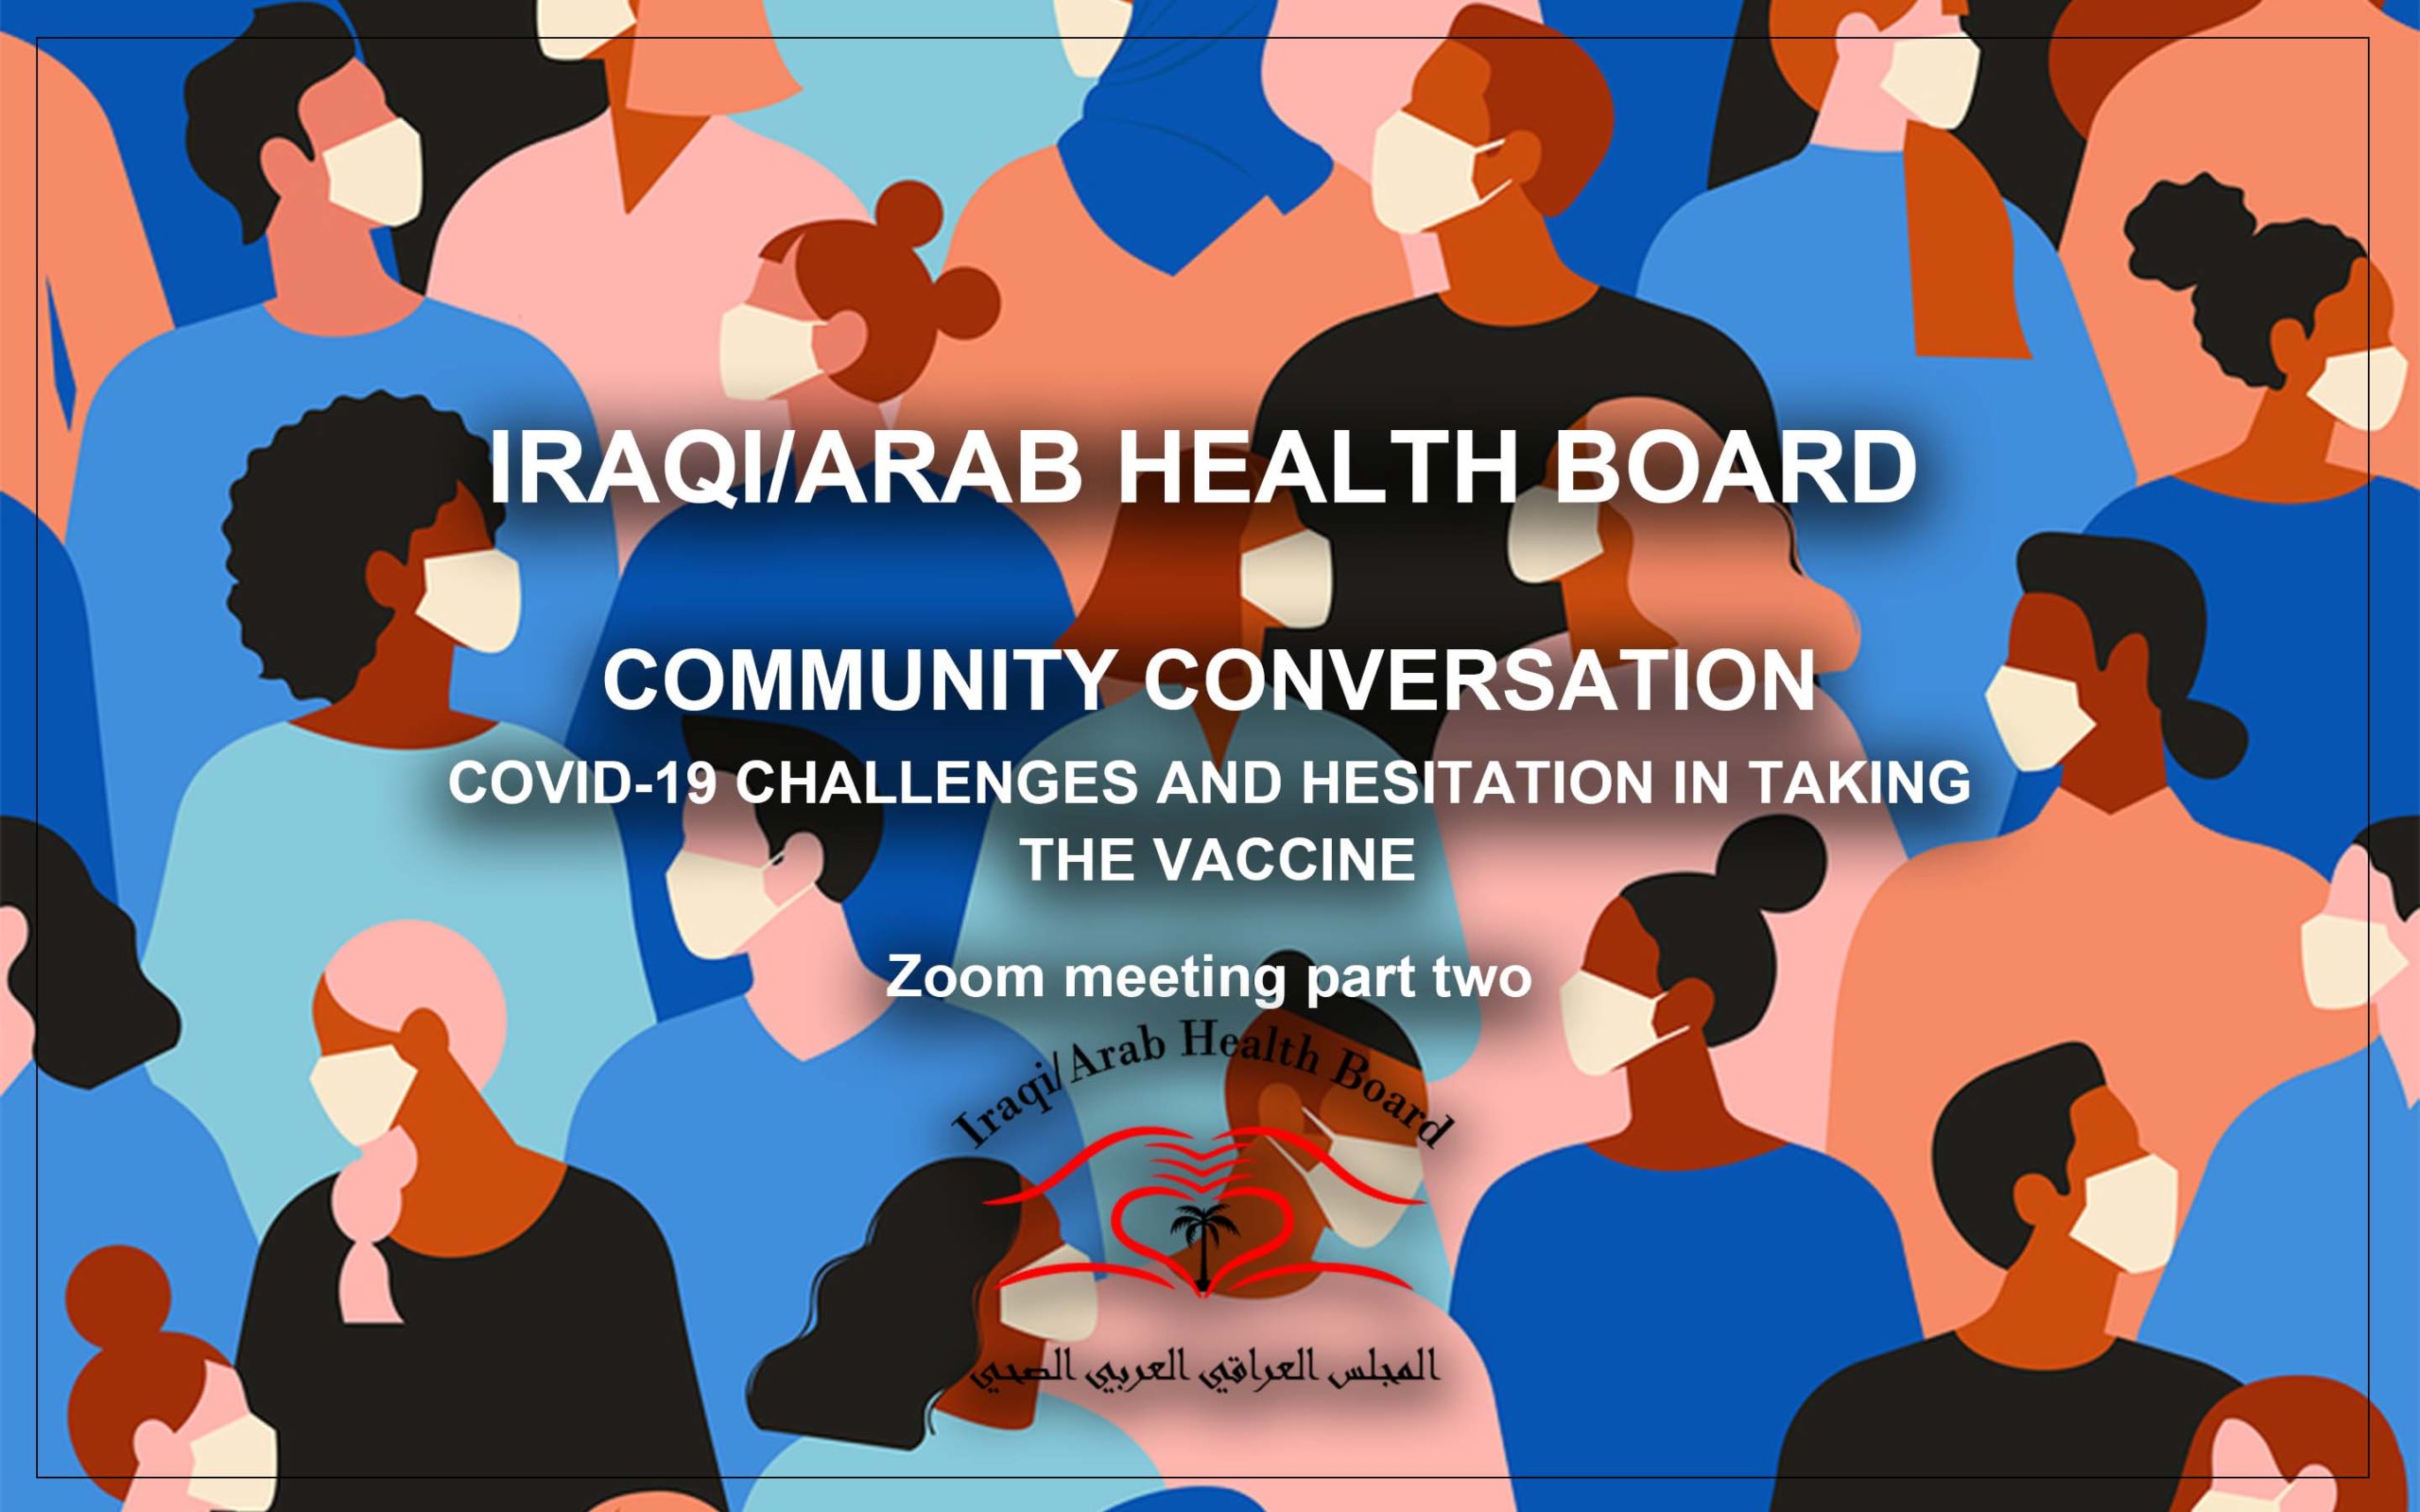 Community Conversation – Covid-19 Challenges and hesitation in taking the vaccine